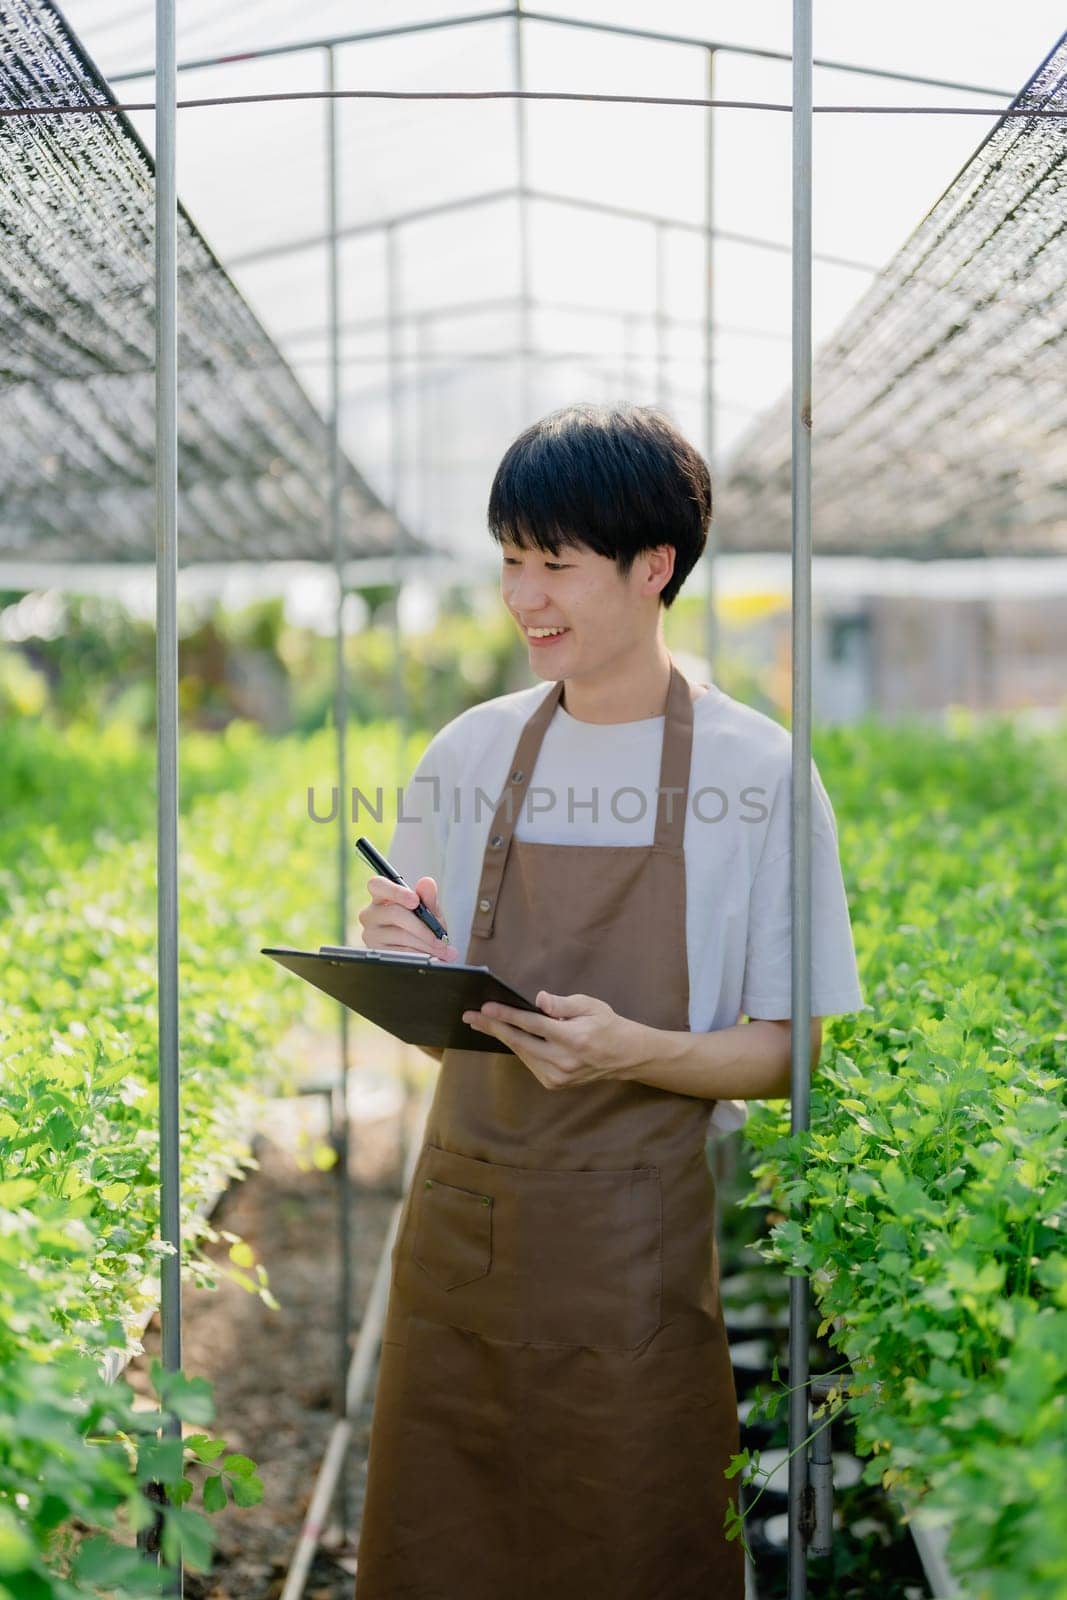 man Farmer harvesting vegetable and audit quality from hydroponics farm. Organic fresh vegetable, Farmer working with hydroponic vegetables garden harvesting, small business concepts